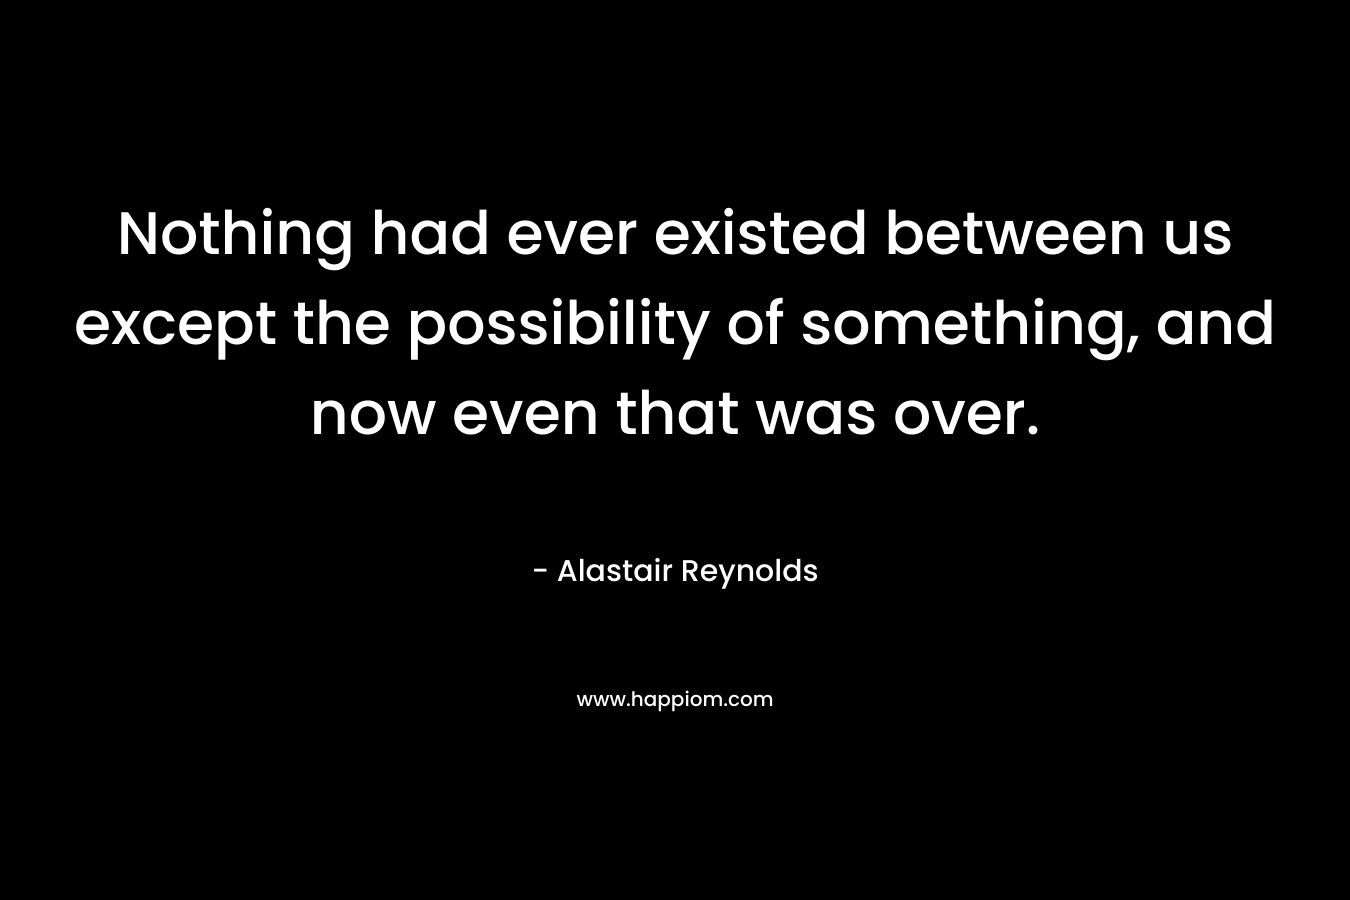 Nothing had ever existed between us except the possibility of something, and now even that was over. – Alastair Reynolds